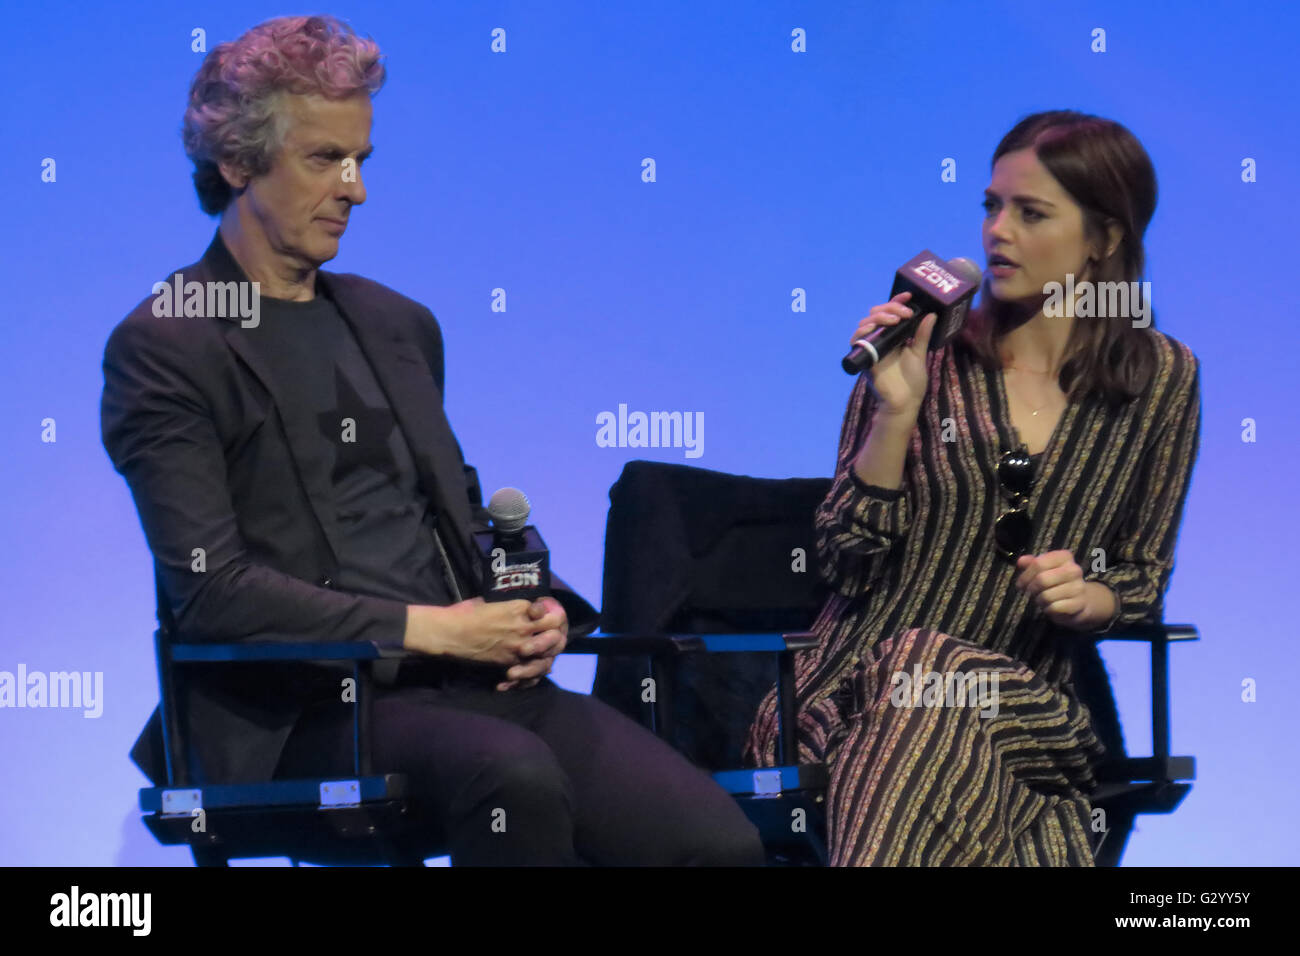 Washington, DC, USA. 5th June, 2016. Doctor Who's Jenna-Louise Coleman (Clara Oswald) answering a question as Peter Capaldi (the Twelfth Doctor) listens at Awesome Con 2016, held in Washington, DC. Credit:  Evan Golub/ZUMA Wire/Alamy Live News Stock Photo